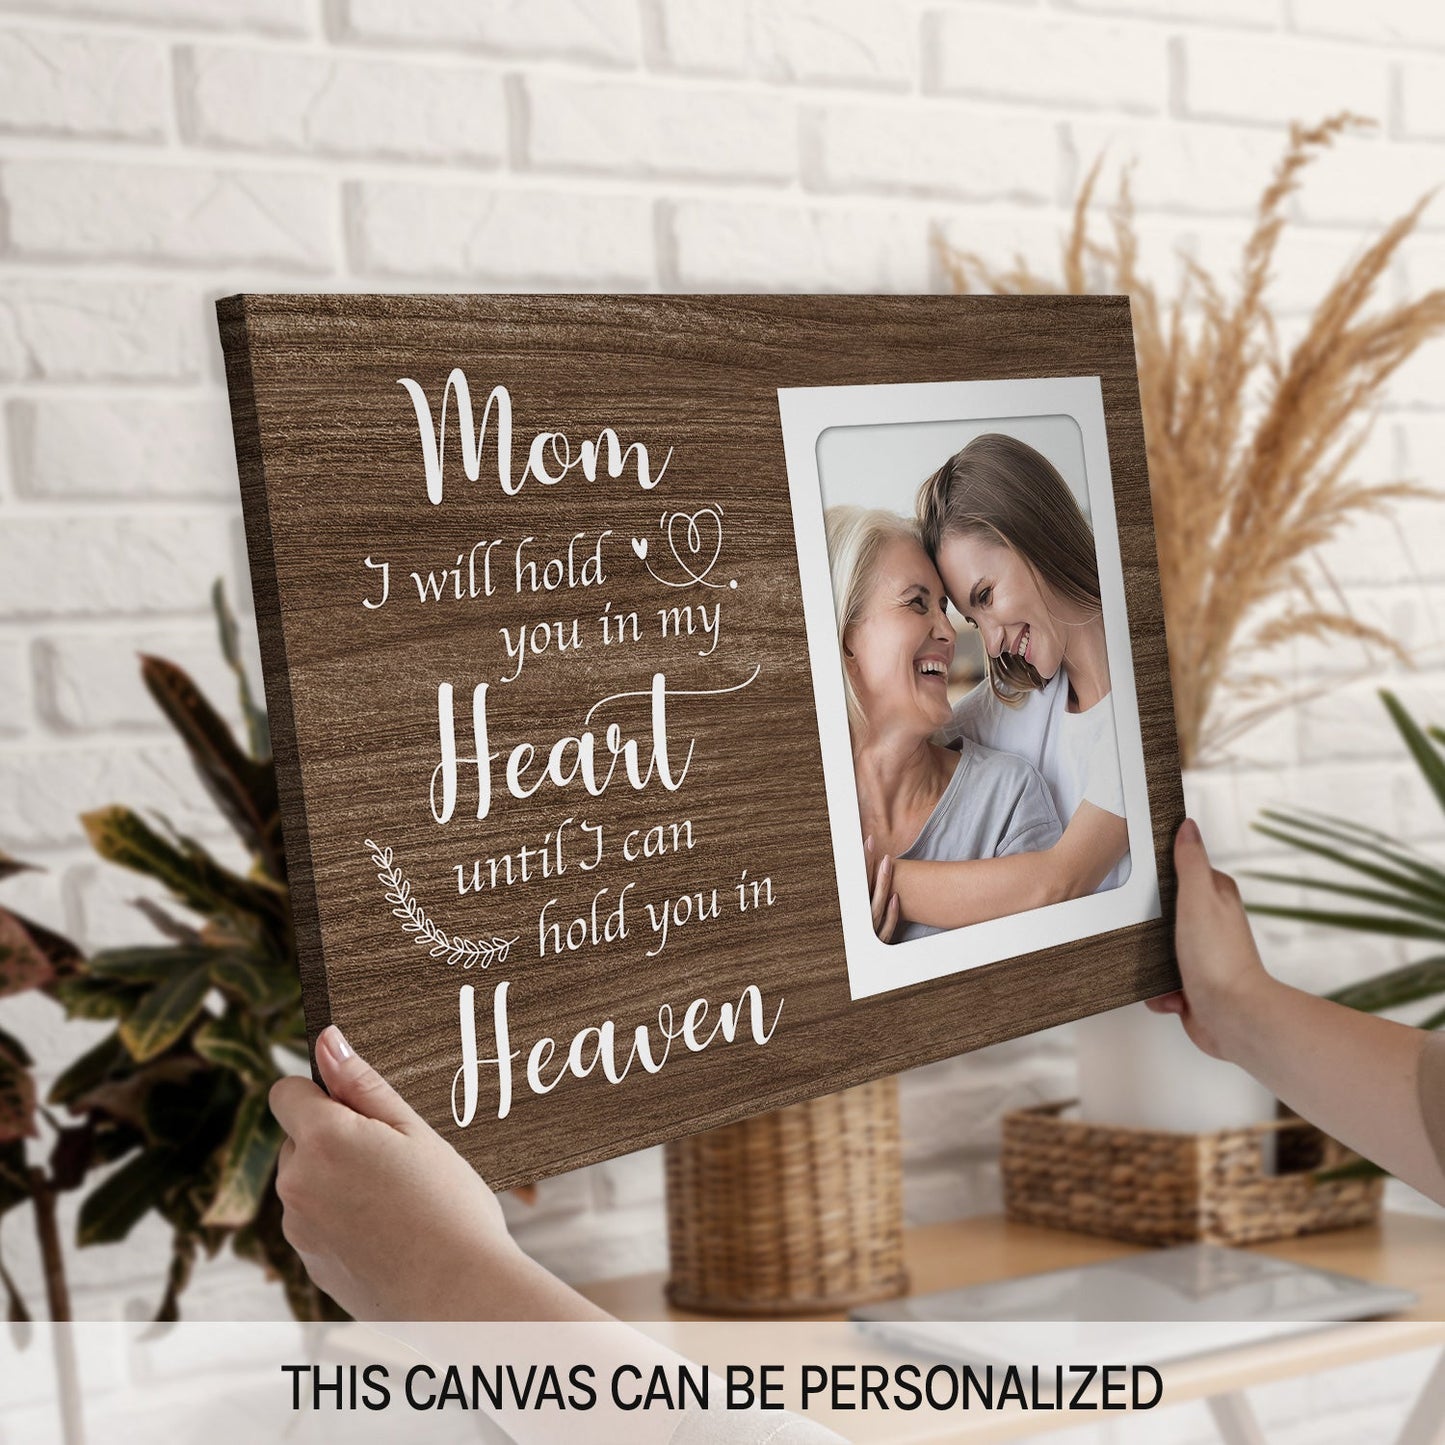 Until I Can Hold You In Heaven - Personalized Memorial gift For Loss Of Mother - Custom Canvas Print - MyMindfulGifts